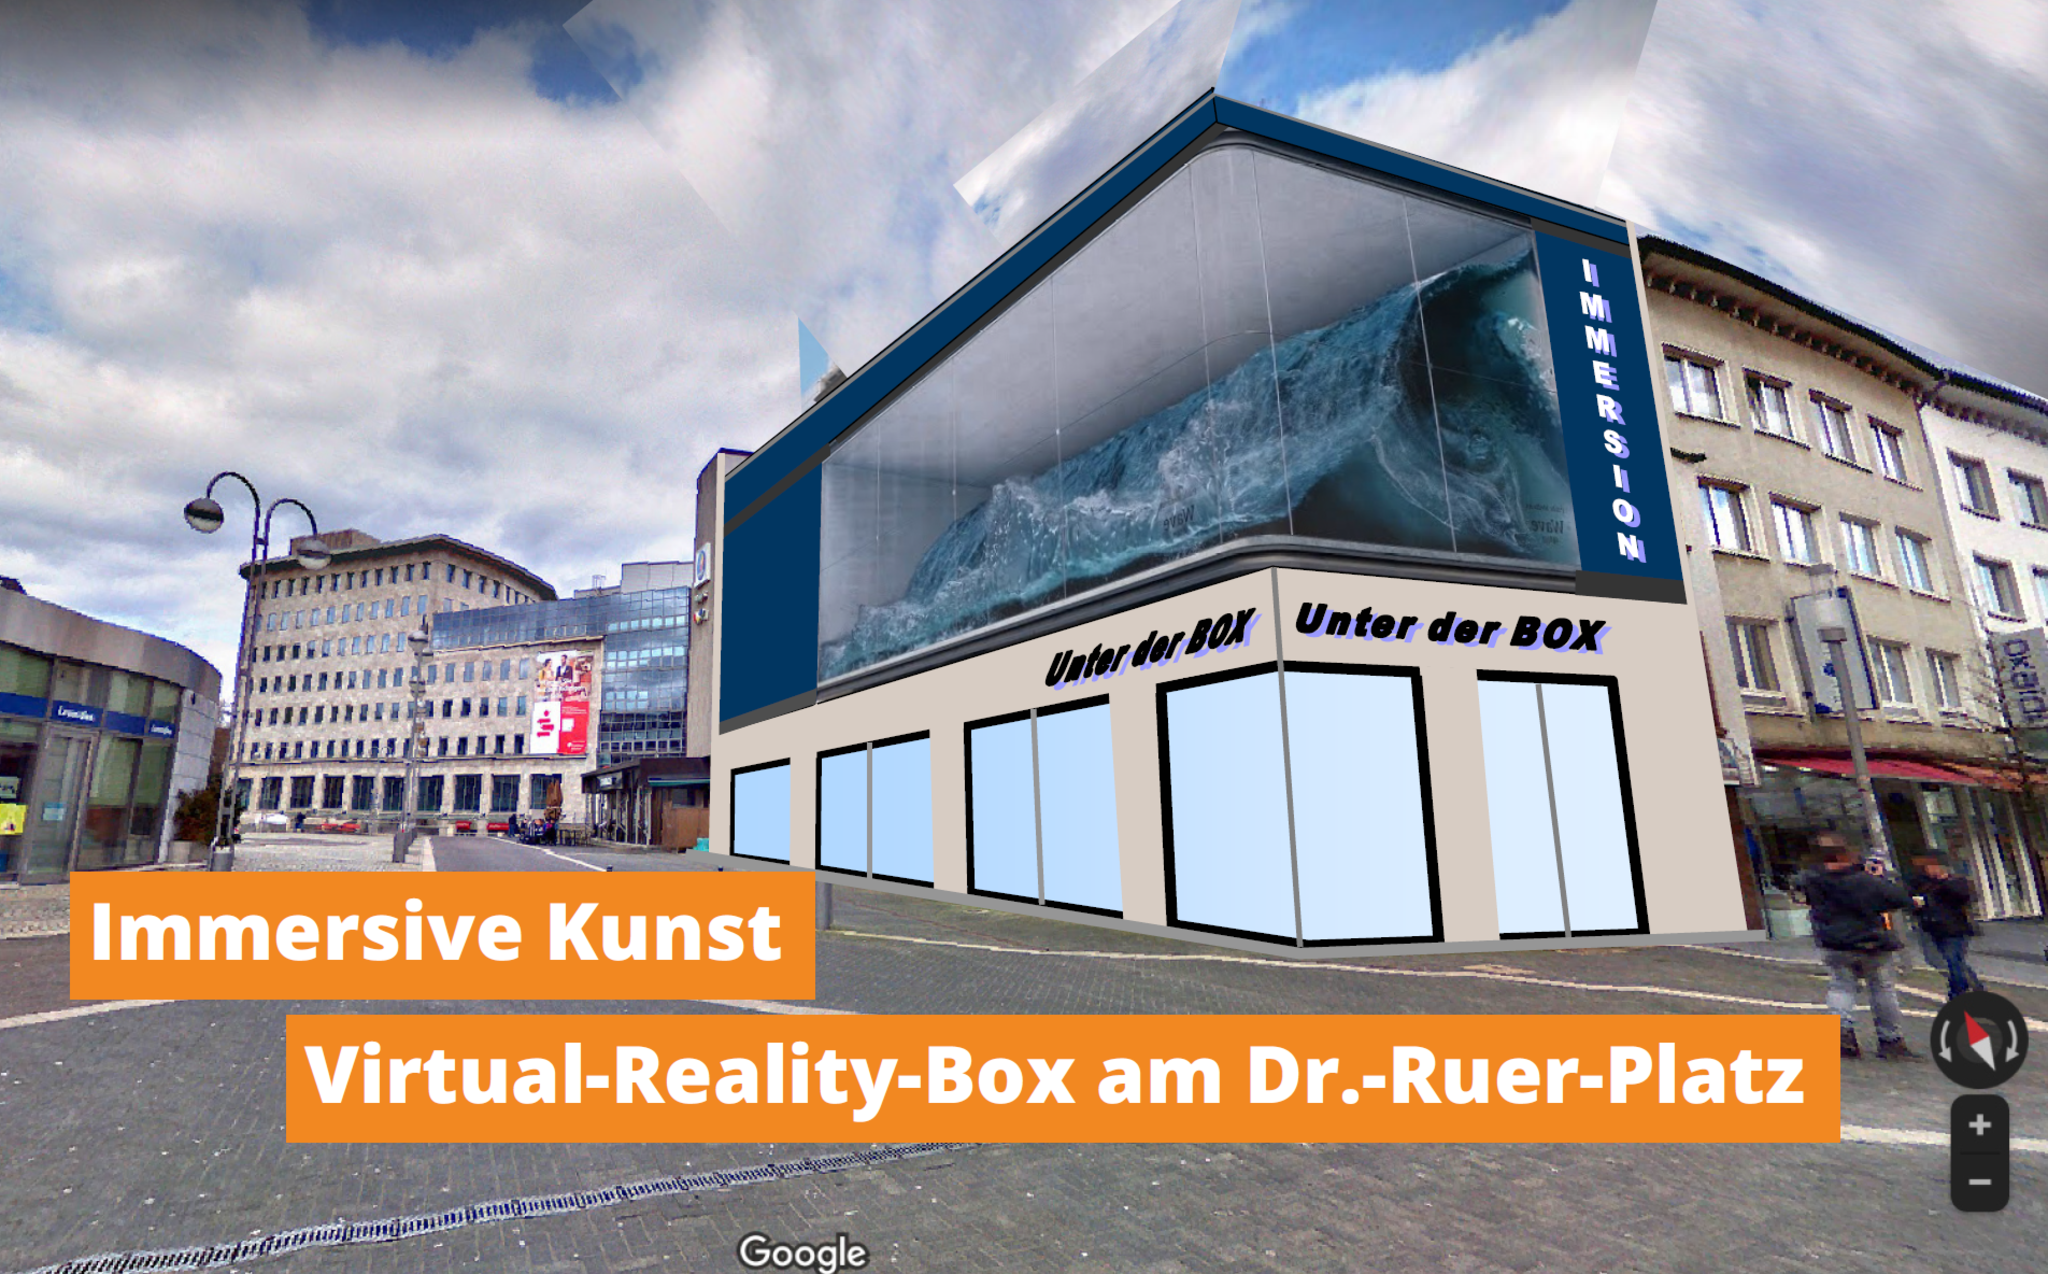 Virtual-Reality-Box at Dr.-Ruer-Platz: A meter high waves, a landing spaceship or a life-size whale in Bochum